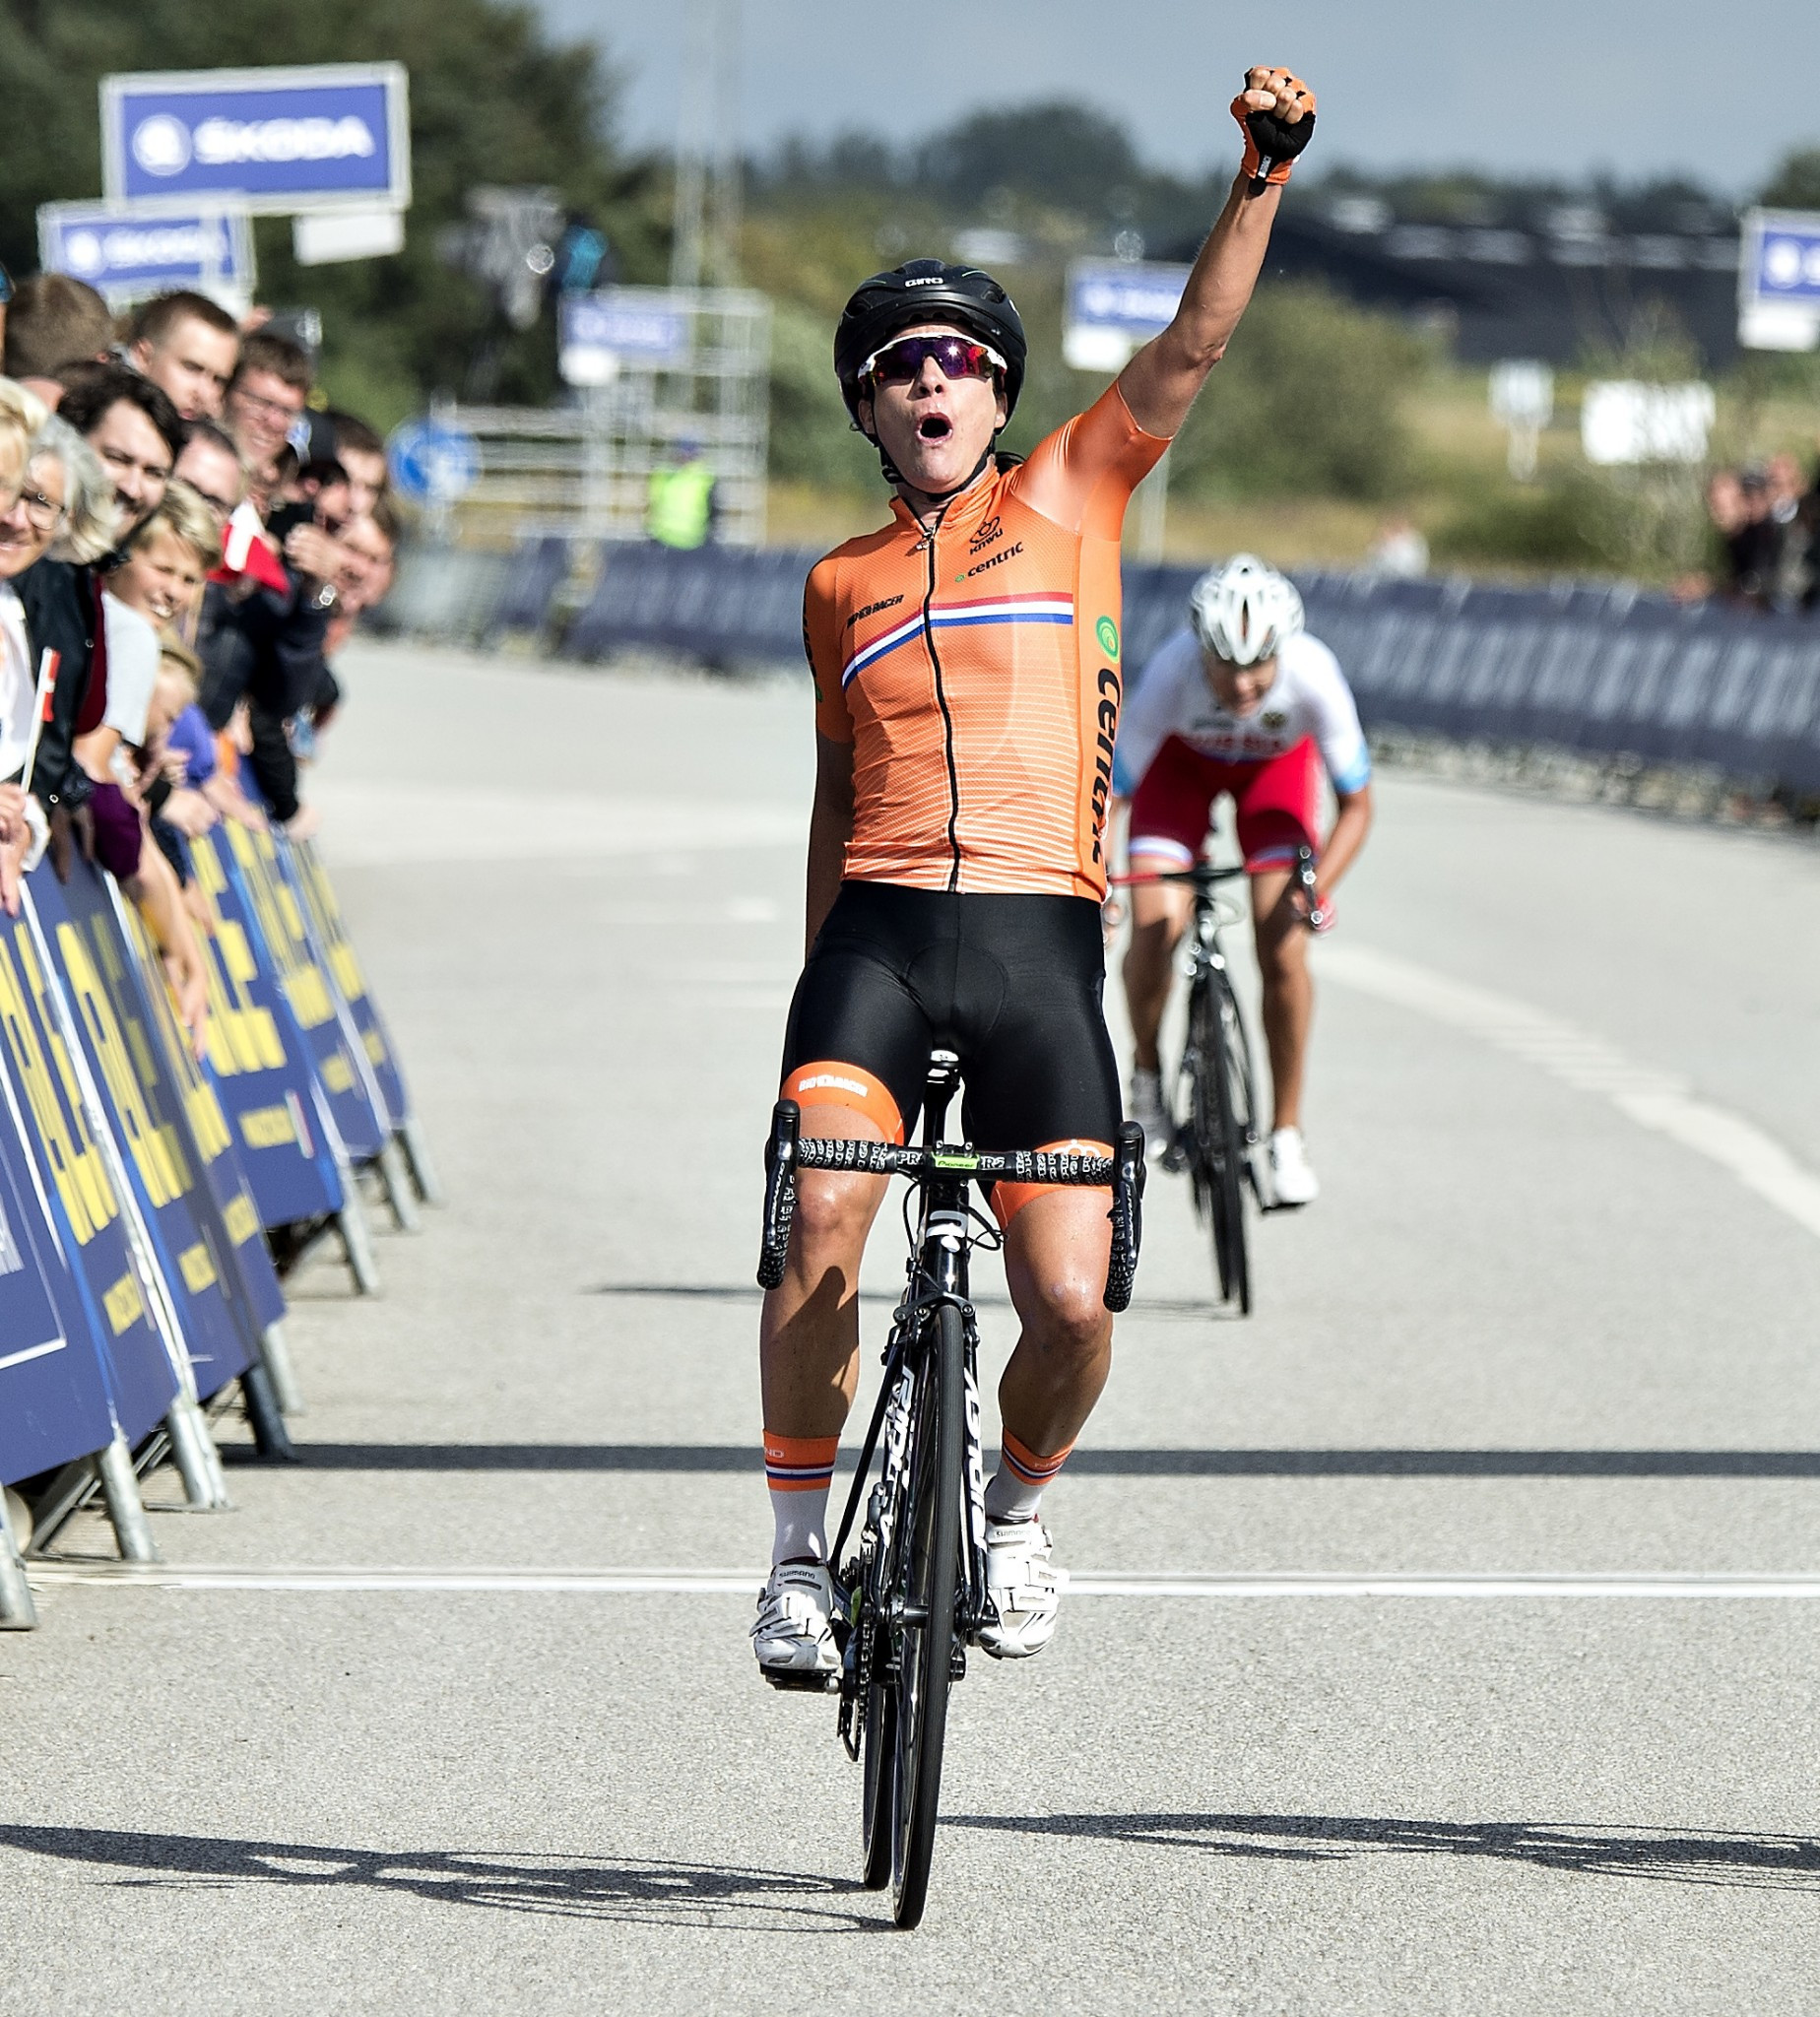 London 2012 champion victorious at UEC Road Championships